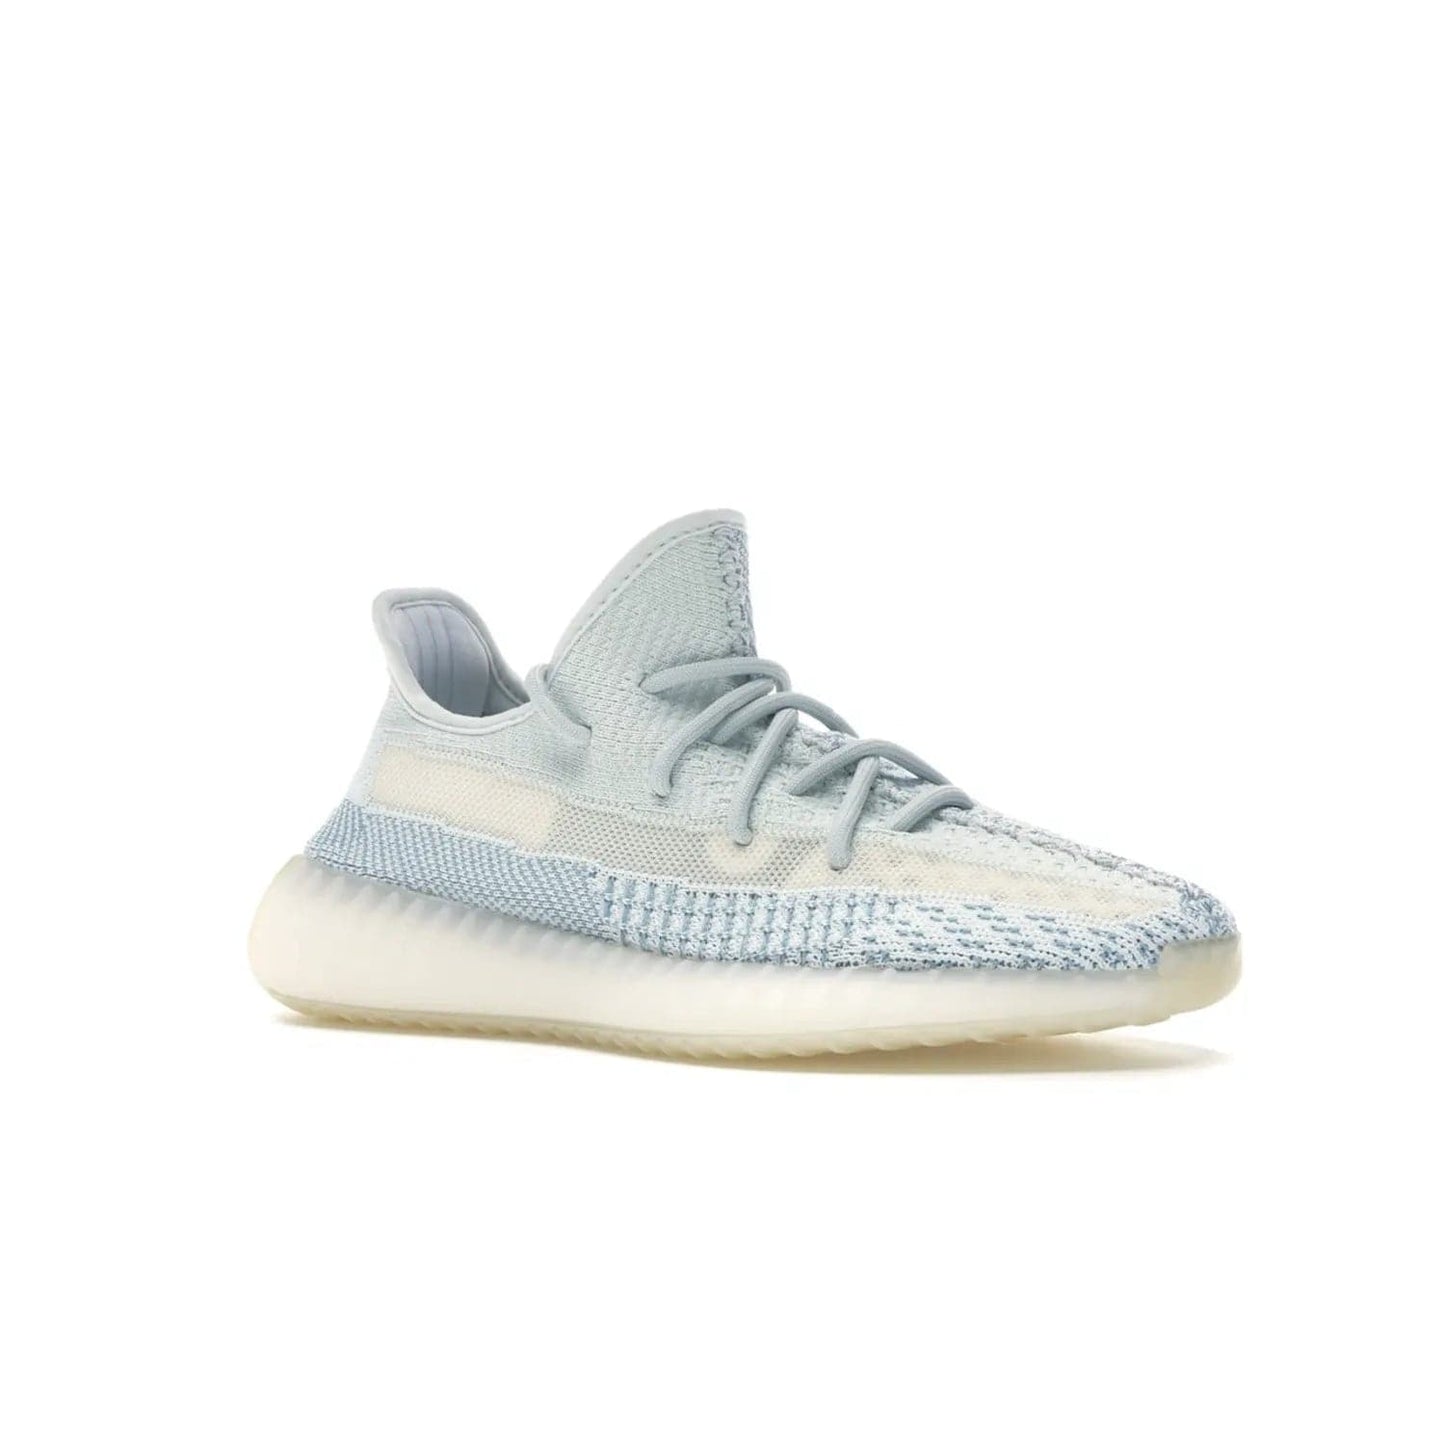 adidas Yeezy Boost 350 V2 Cloud White (Non-Reflective) - Image 4 - Only at www.BallersClubKickz.com - Uniquely designed adidas Yeezy Boost 350 V2 Cloud White (Non-Reflective) with a Primeknit upper in shades of cream and blue with a contrasting hard sole. A fashion-forward sneaker with a transparent strip and blue-and-white patterns.